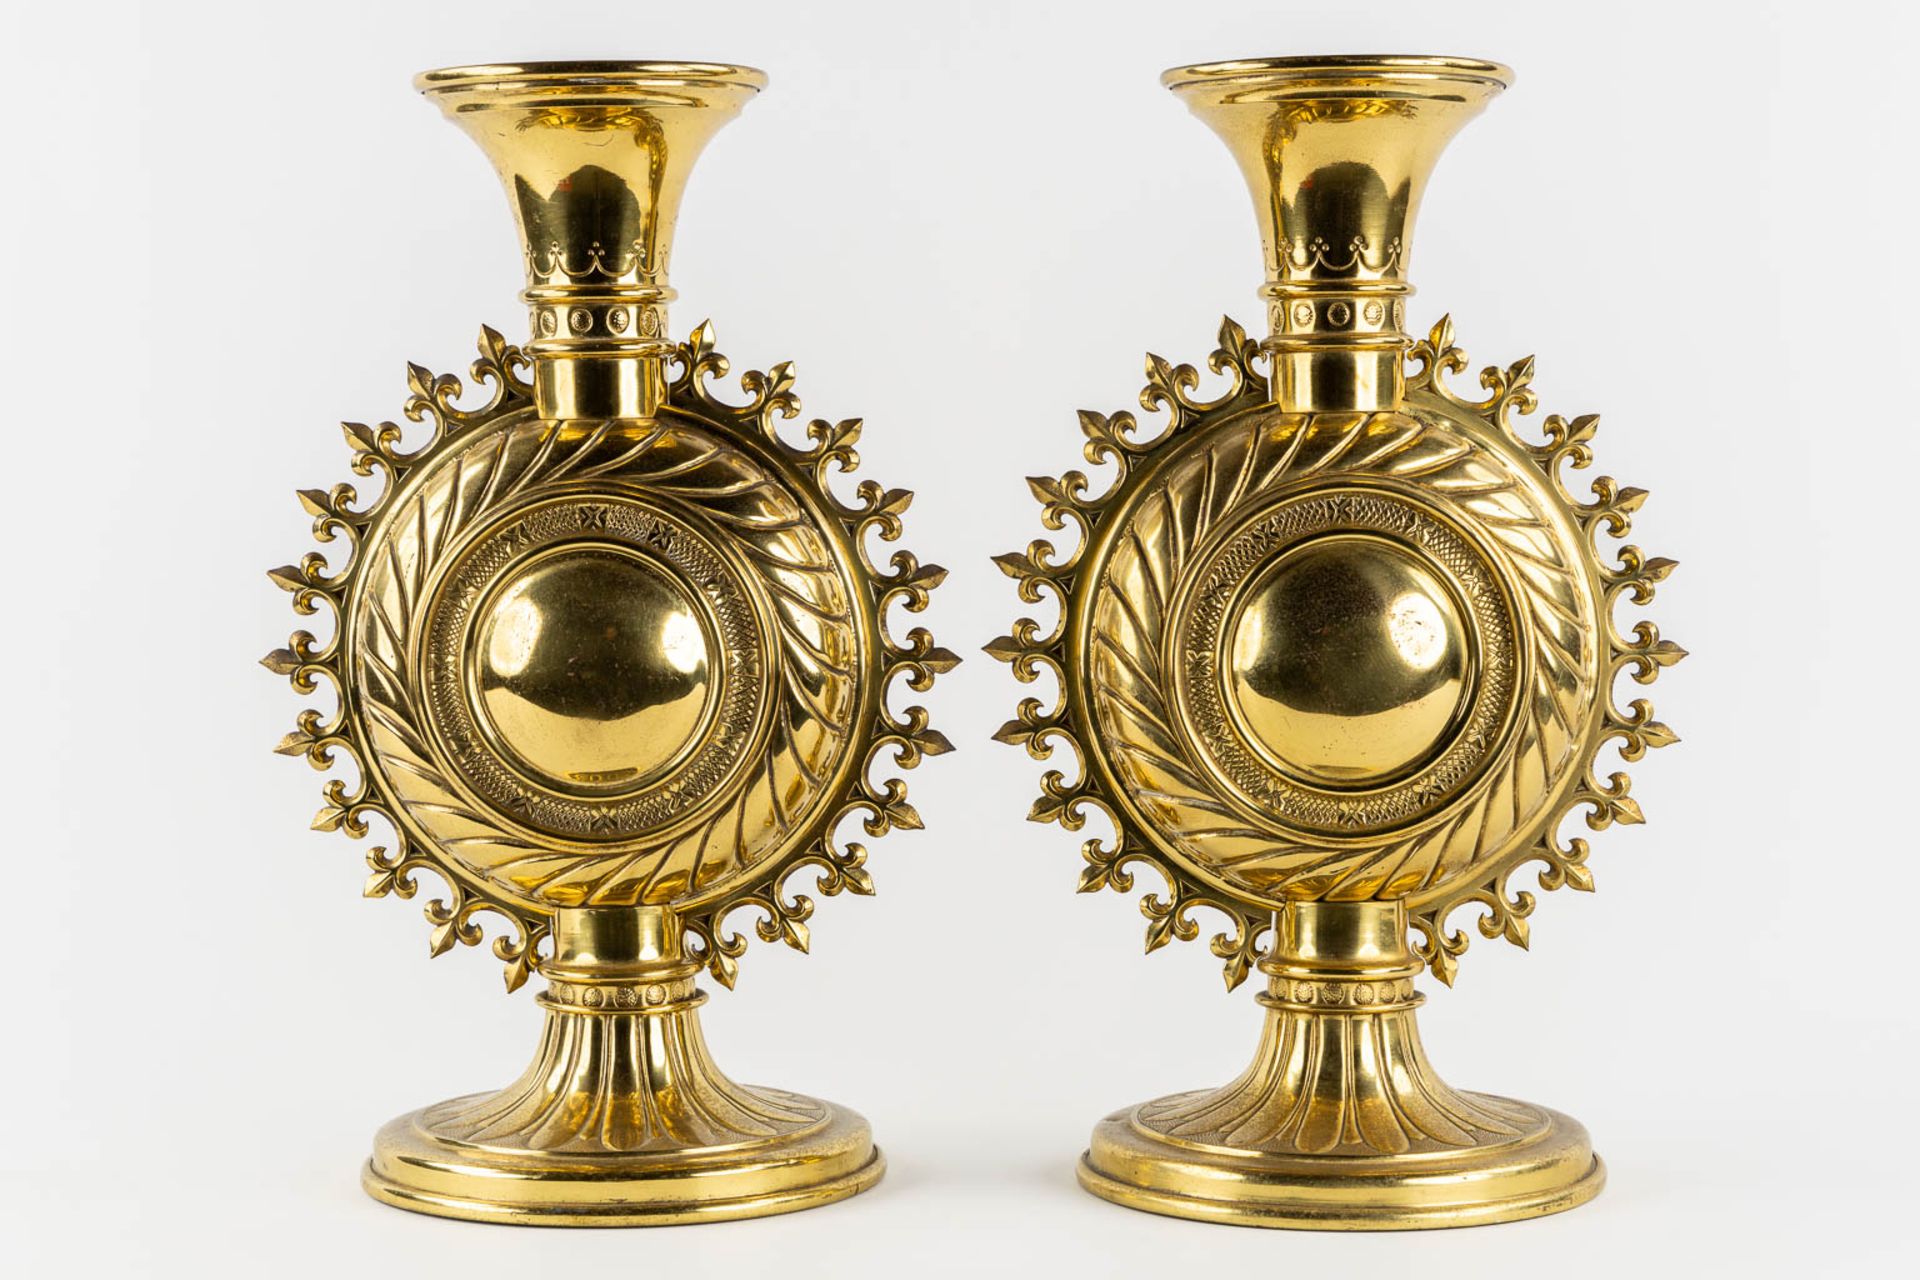 A pair of candelabra, brass, gothic Revival. (L:21 x W:27 x H:42 cm) - Image 3 of 11